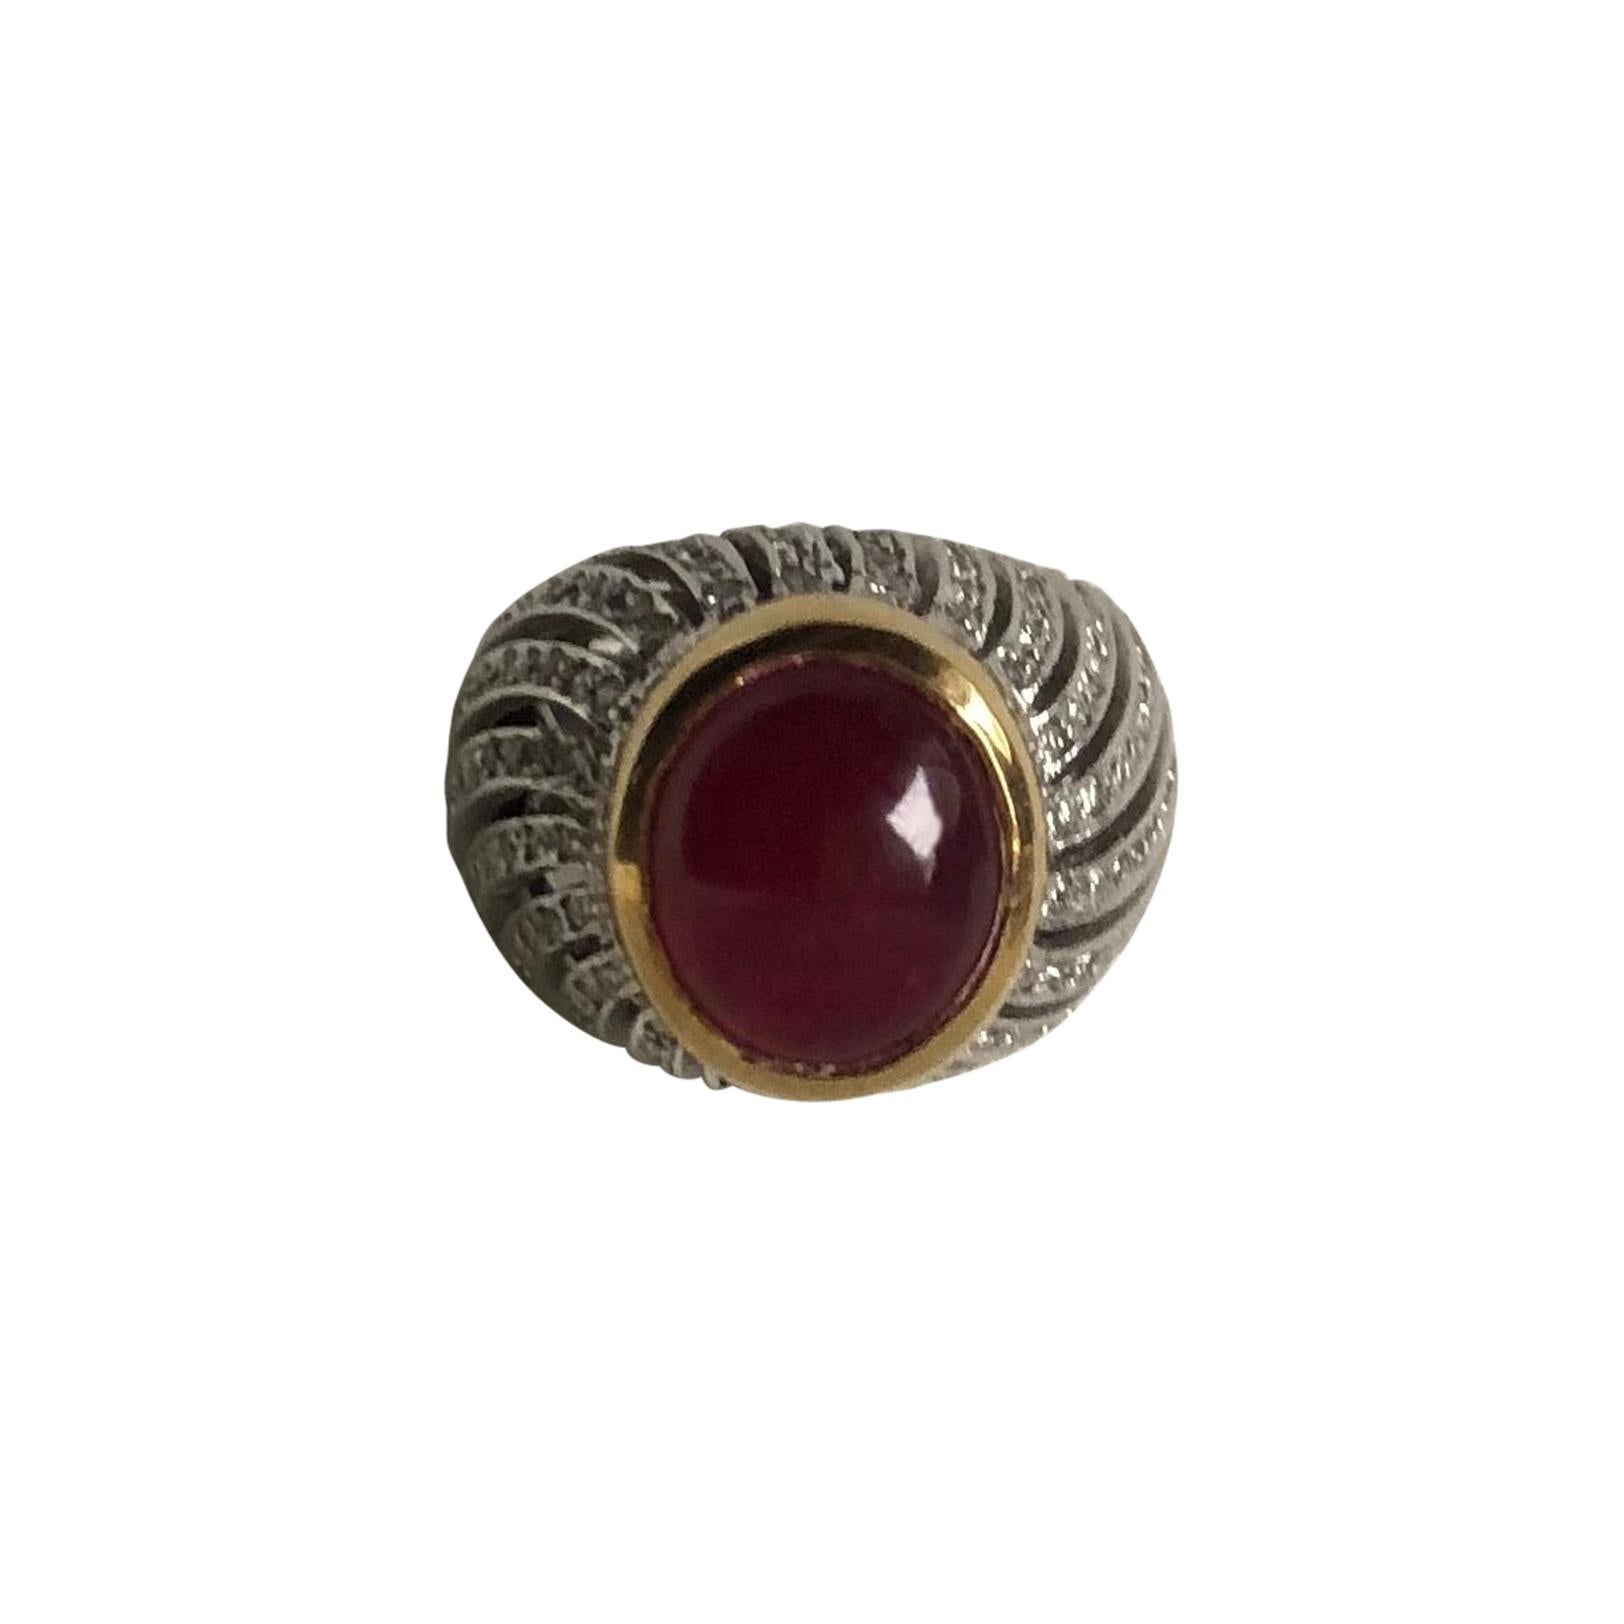 18kt yellow and white gold ring with estimated over 10 cts cabochon ruby  and diamonds. 
Oval cabochon ruby treated, non transparent, deep red colour, dimensions: 1.6 cm x 1.2 cm. 
110 Diamonds (round brilliant cut, weight of  1.20cts, color  H and